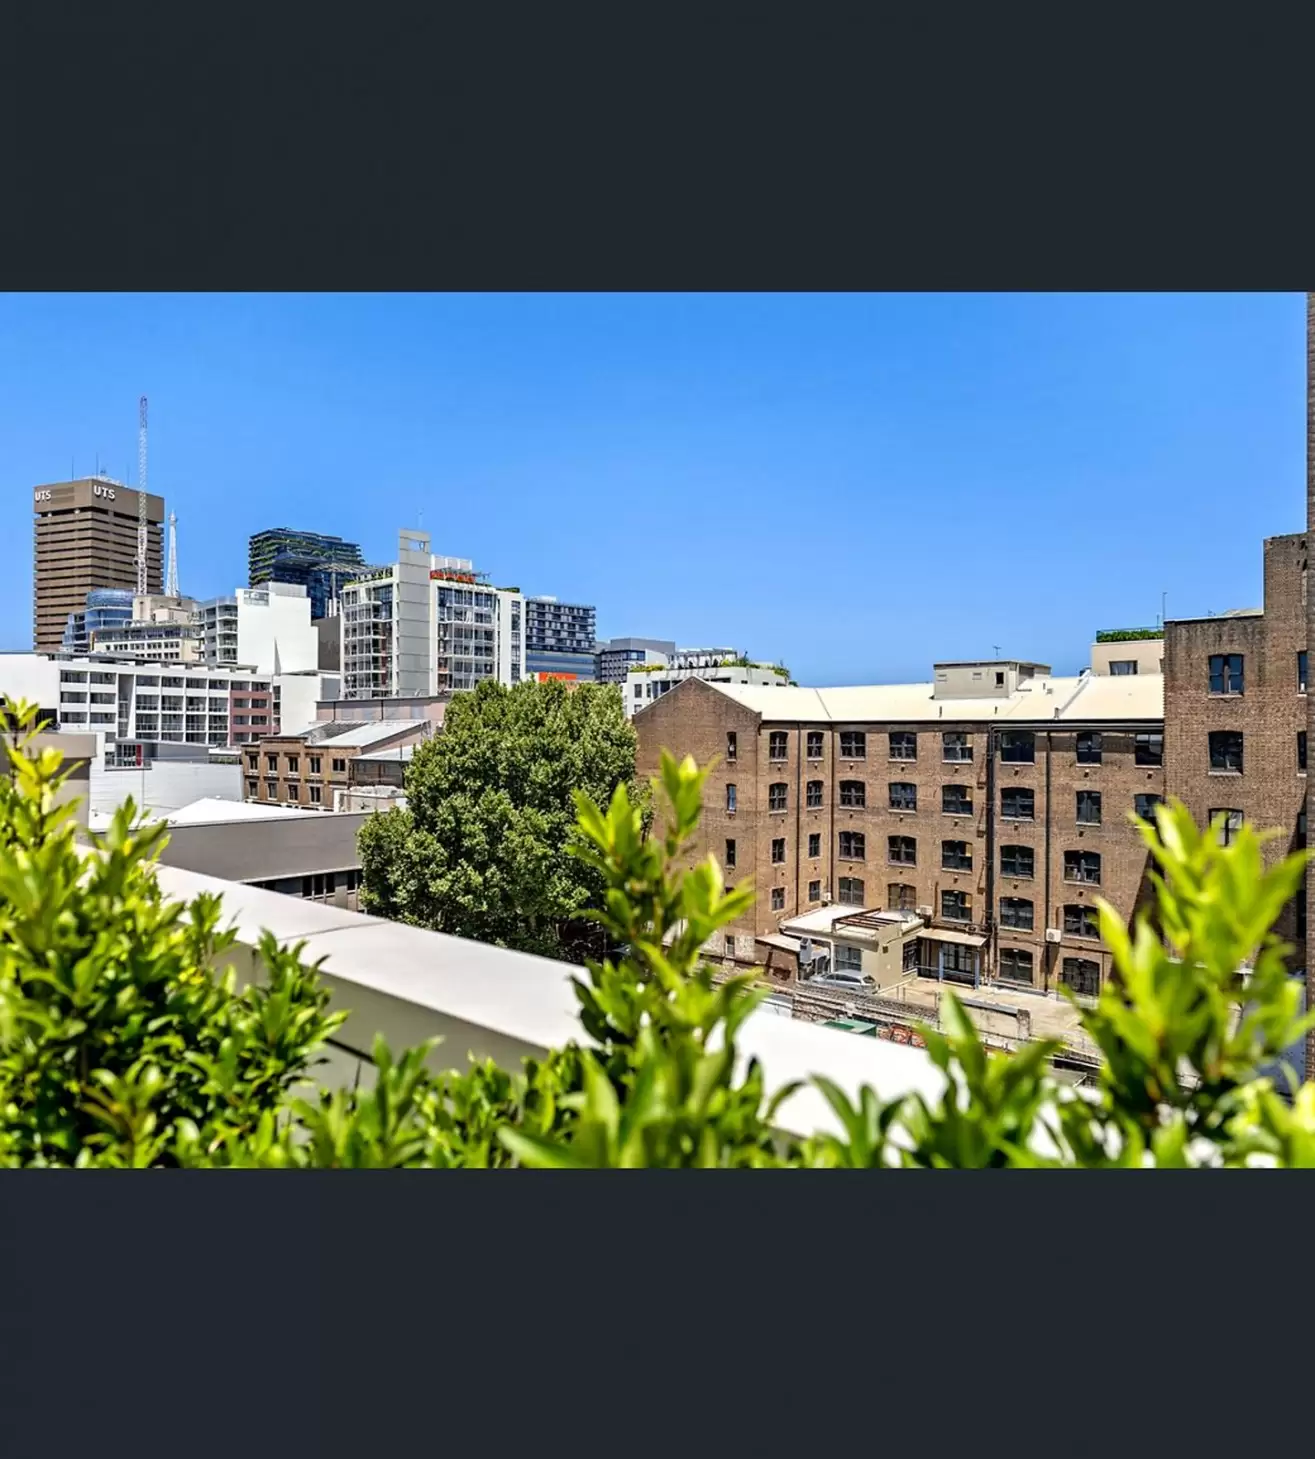 Photo #6: 506/2-12 Smail Street, Ultimo - Sold by Sydney Sotheby's International Realty